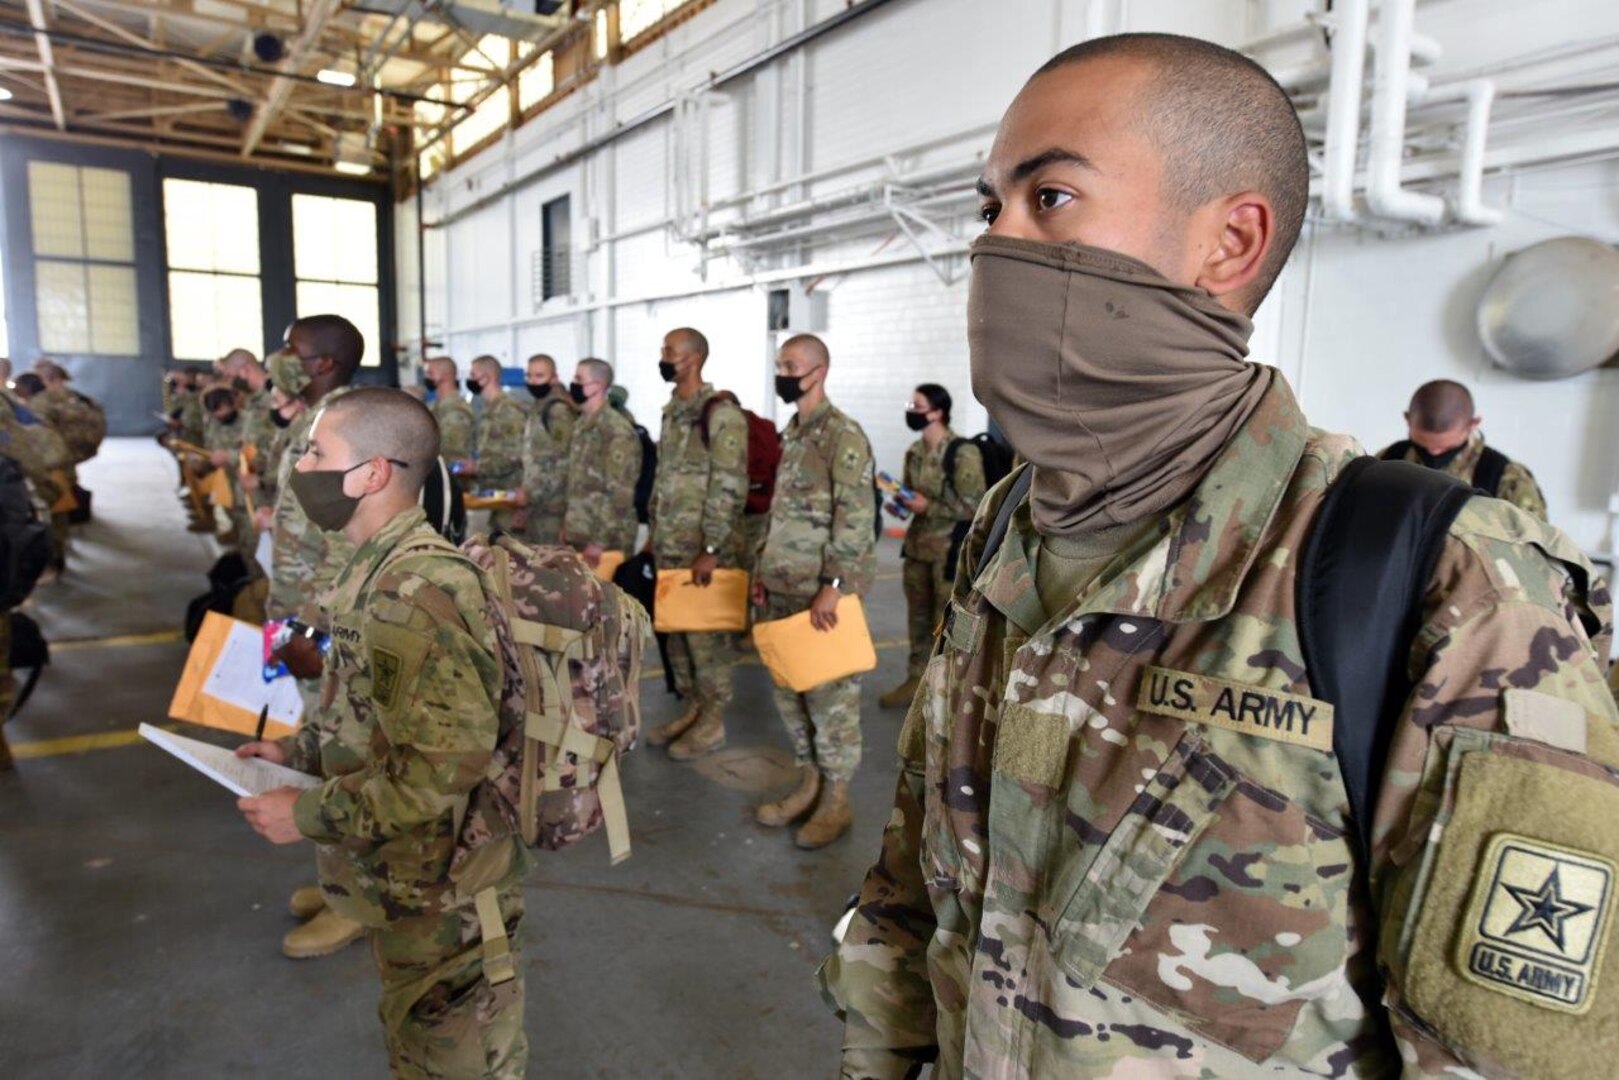 Soldiers stand in formation inside a hangar at Joint Base San Antonio-Kelly Field Annex during a layover as they travelled from Fort Jackson, Mississippi, to Fort Huachuca, Arizona. They were on a chartered flight along with Soldiers that also departed Fort Jackson to begin training at the U.S. Army Medical Center of Excellence.